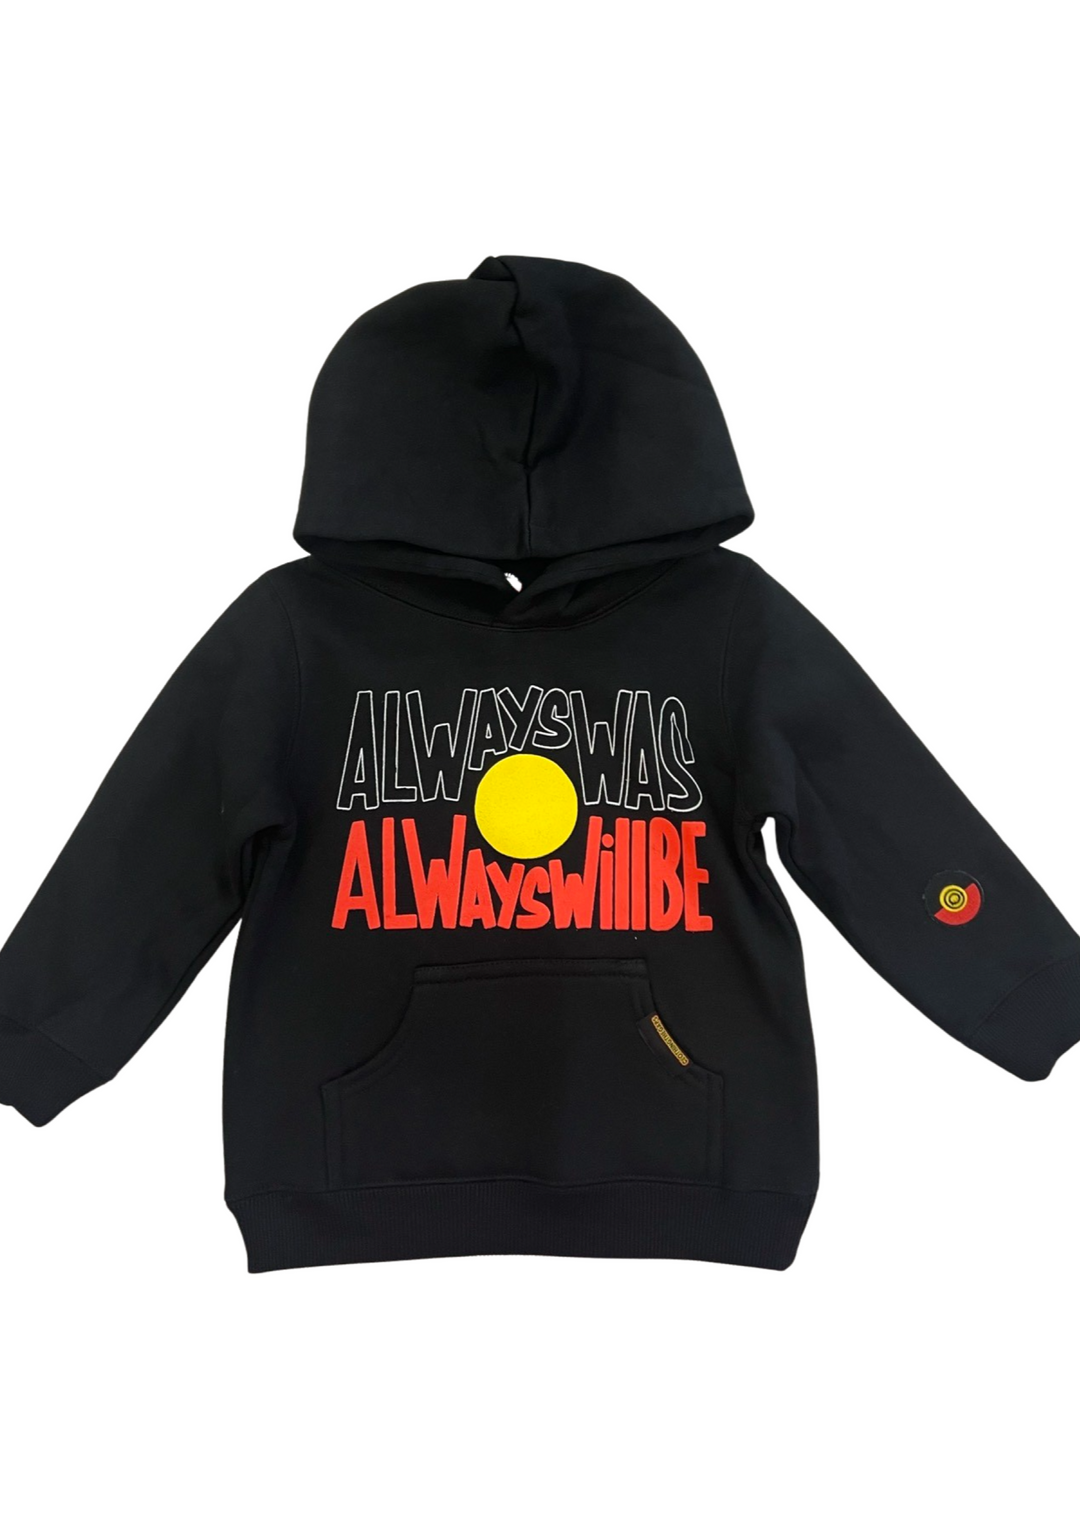 Clothing The Gaps. Black kids hoodie with Black, yellow and red 'always was always will be' text screen printed in centre.